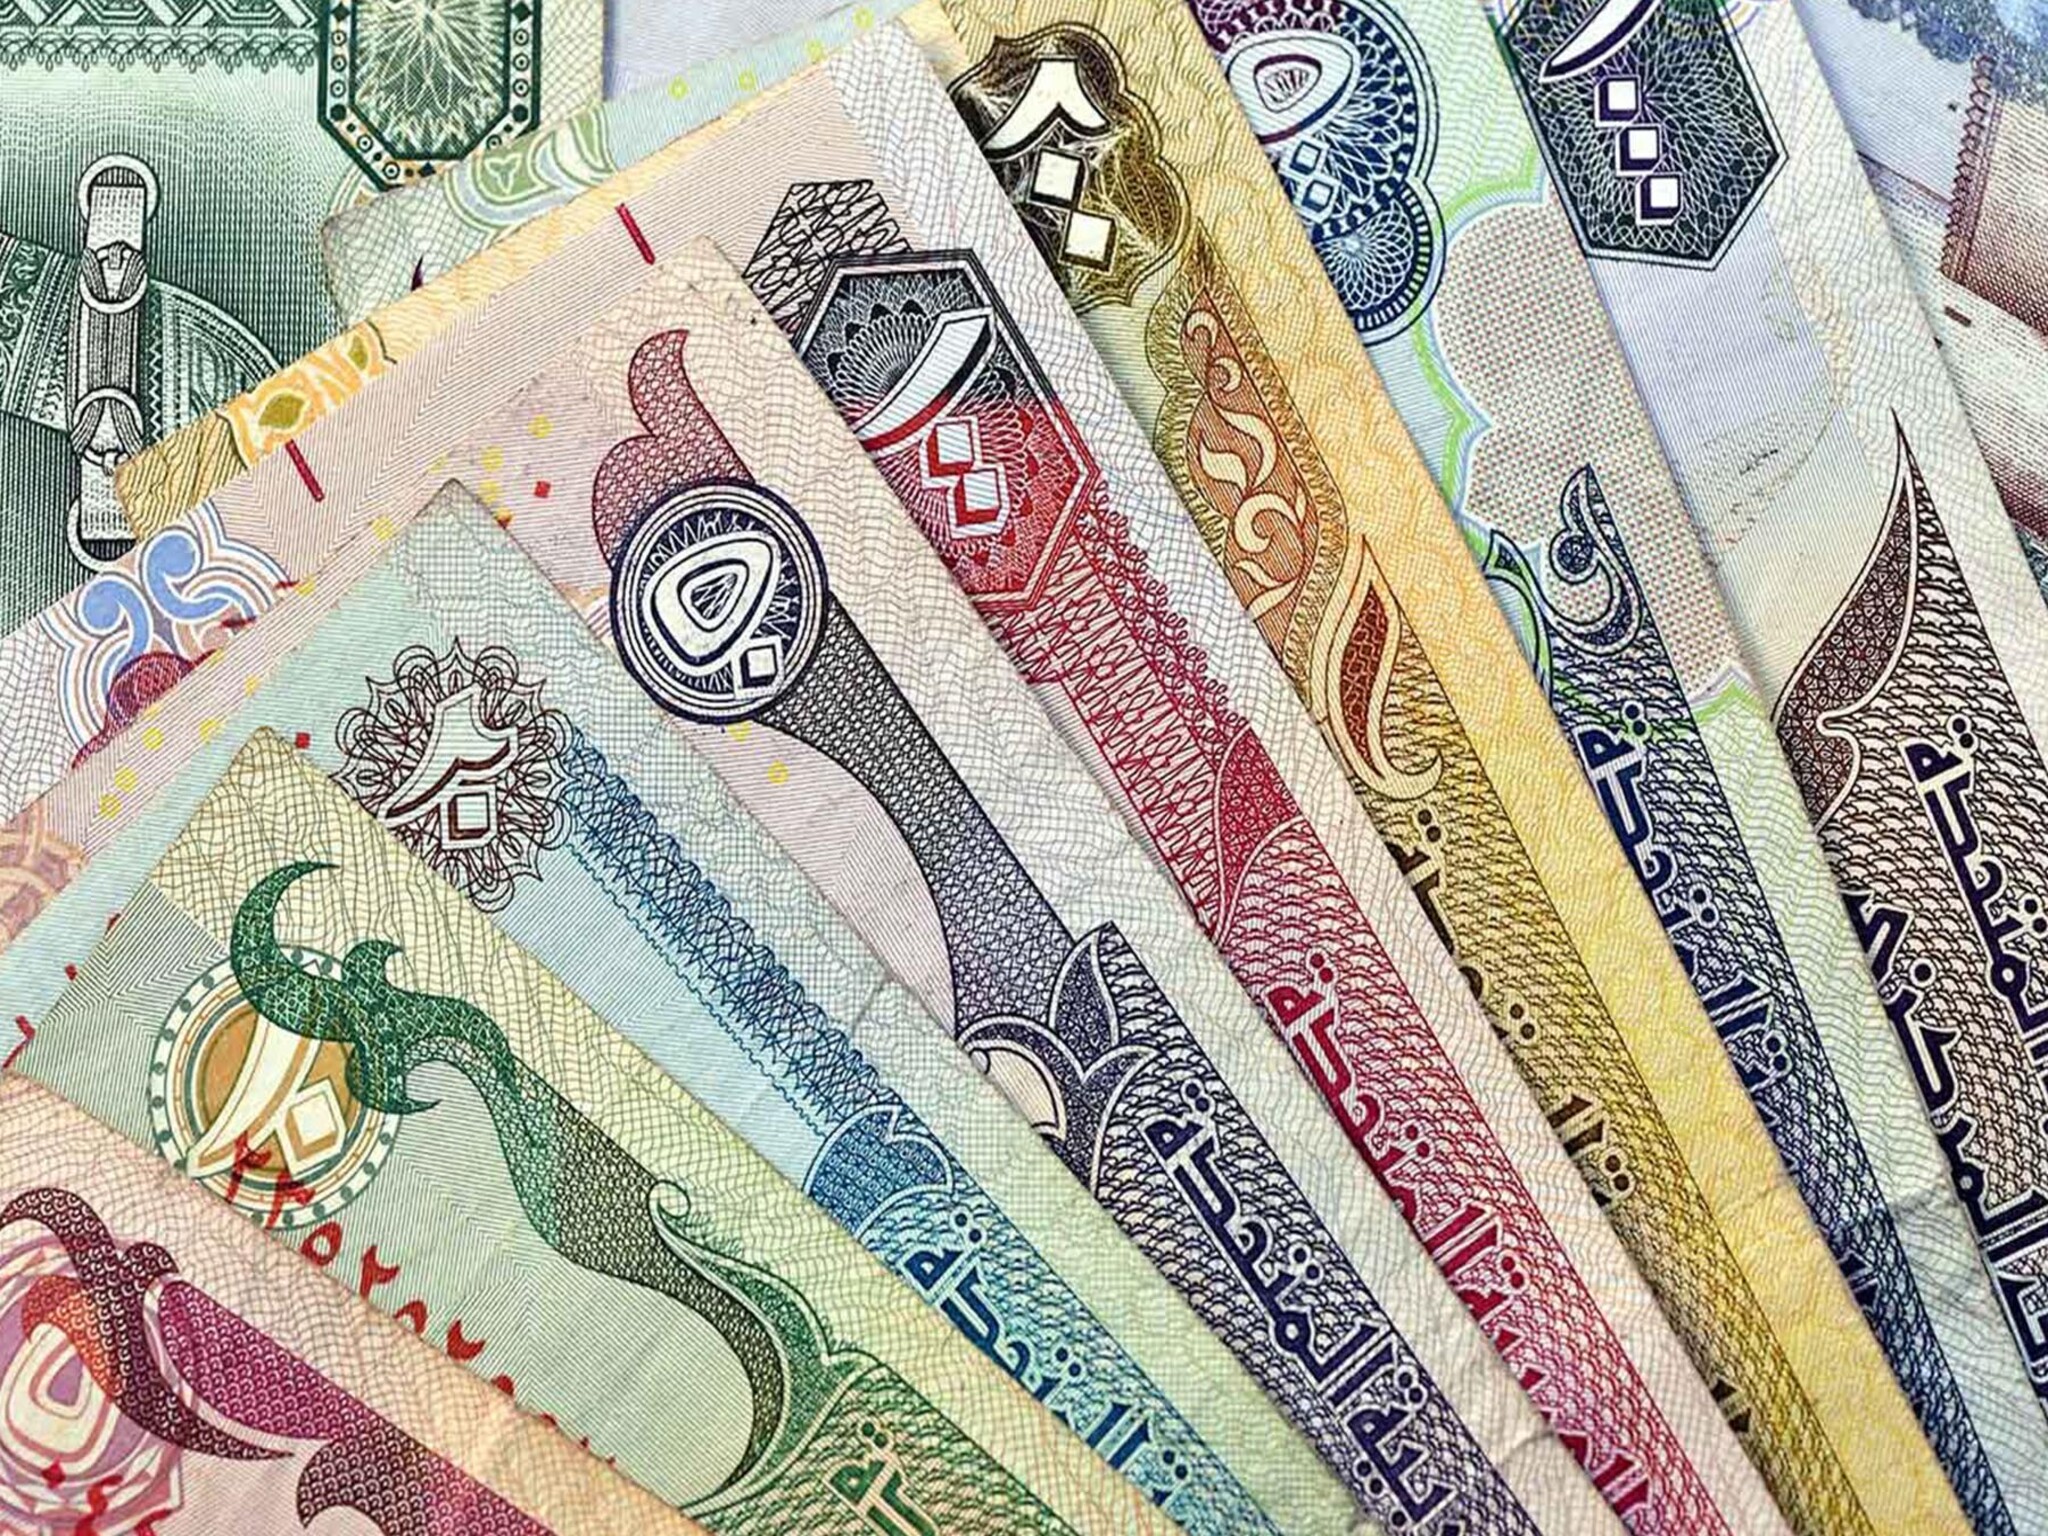 The UAE issues a decision regarding To pay overstay residence fines